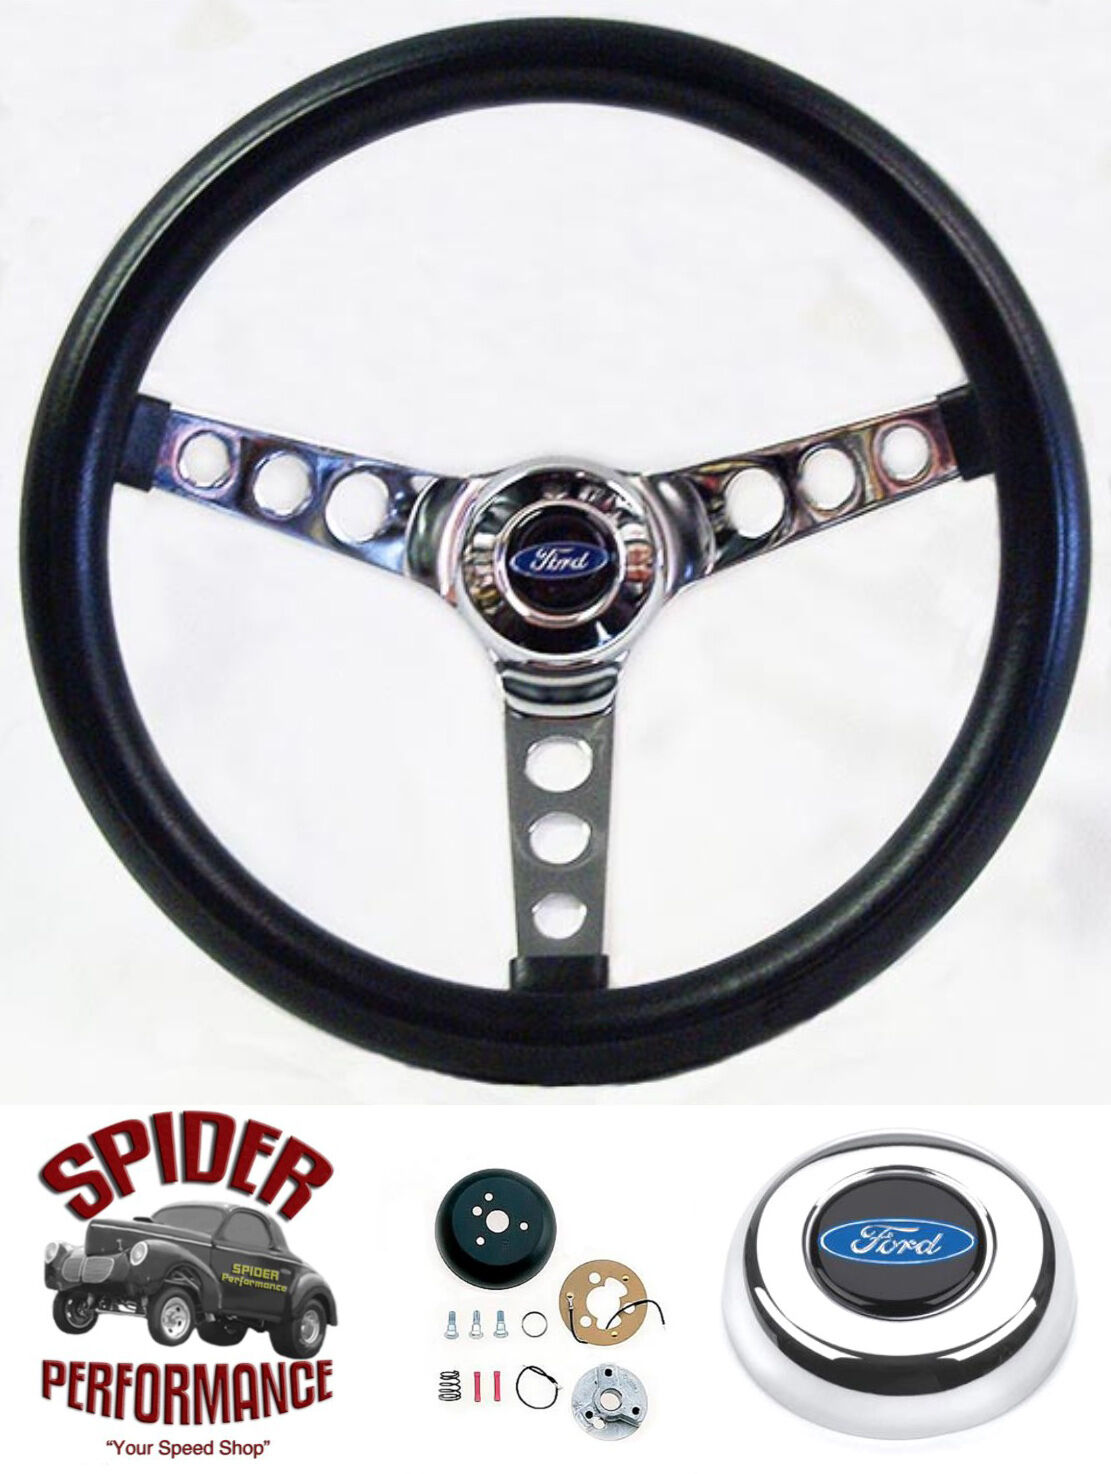 1970-1980 Ford steering wheel BLUE OVAL 13 1/2